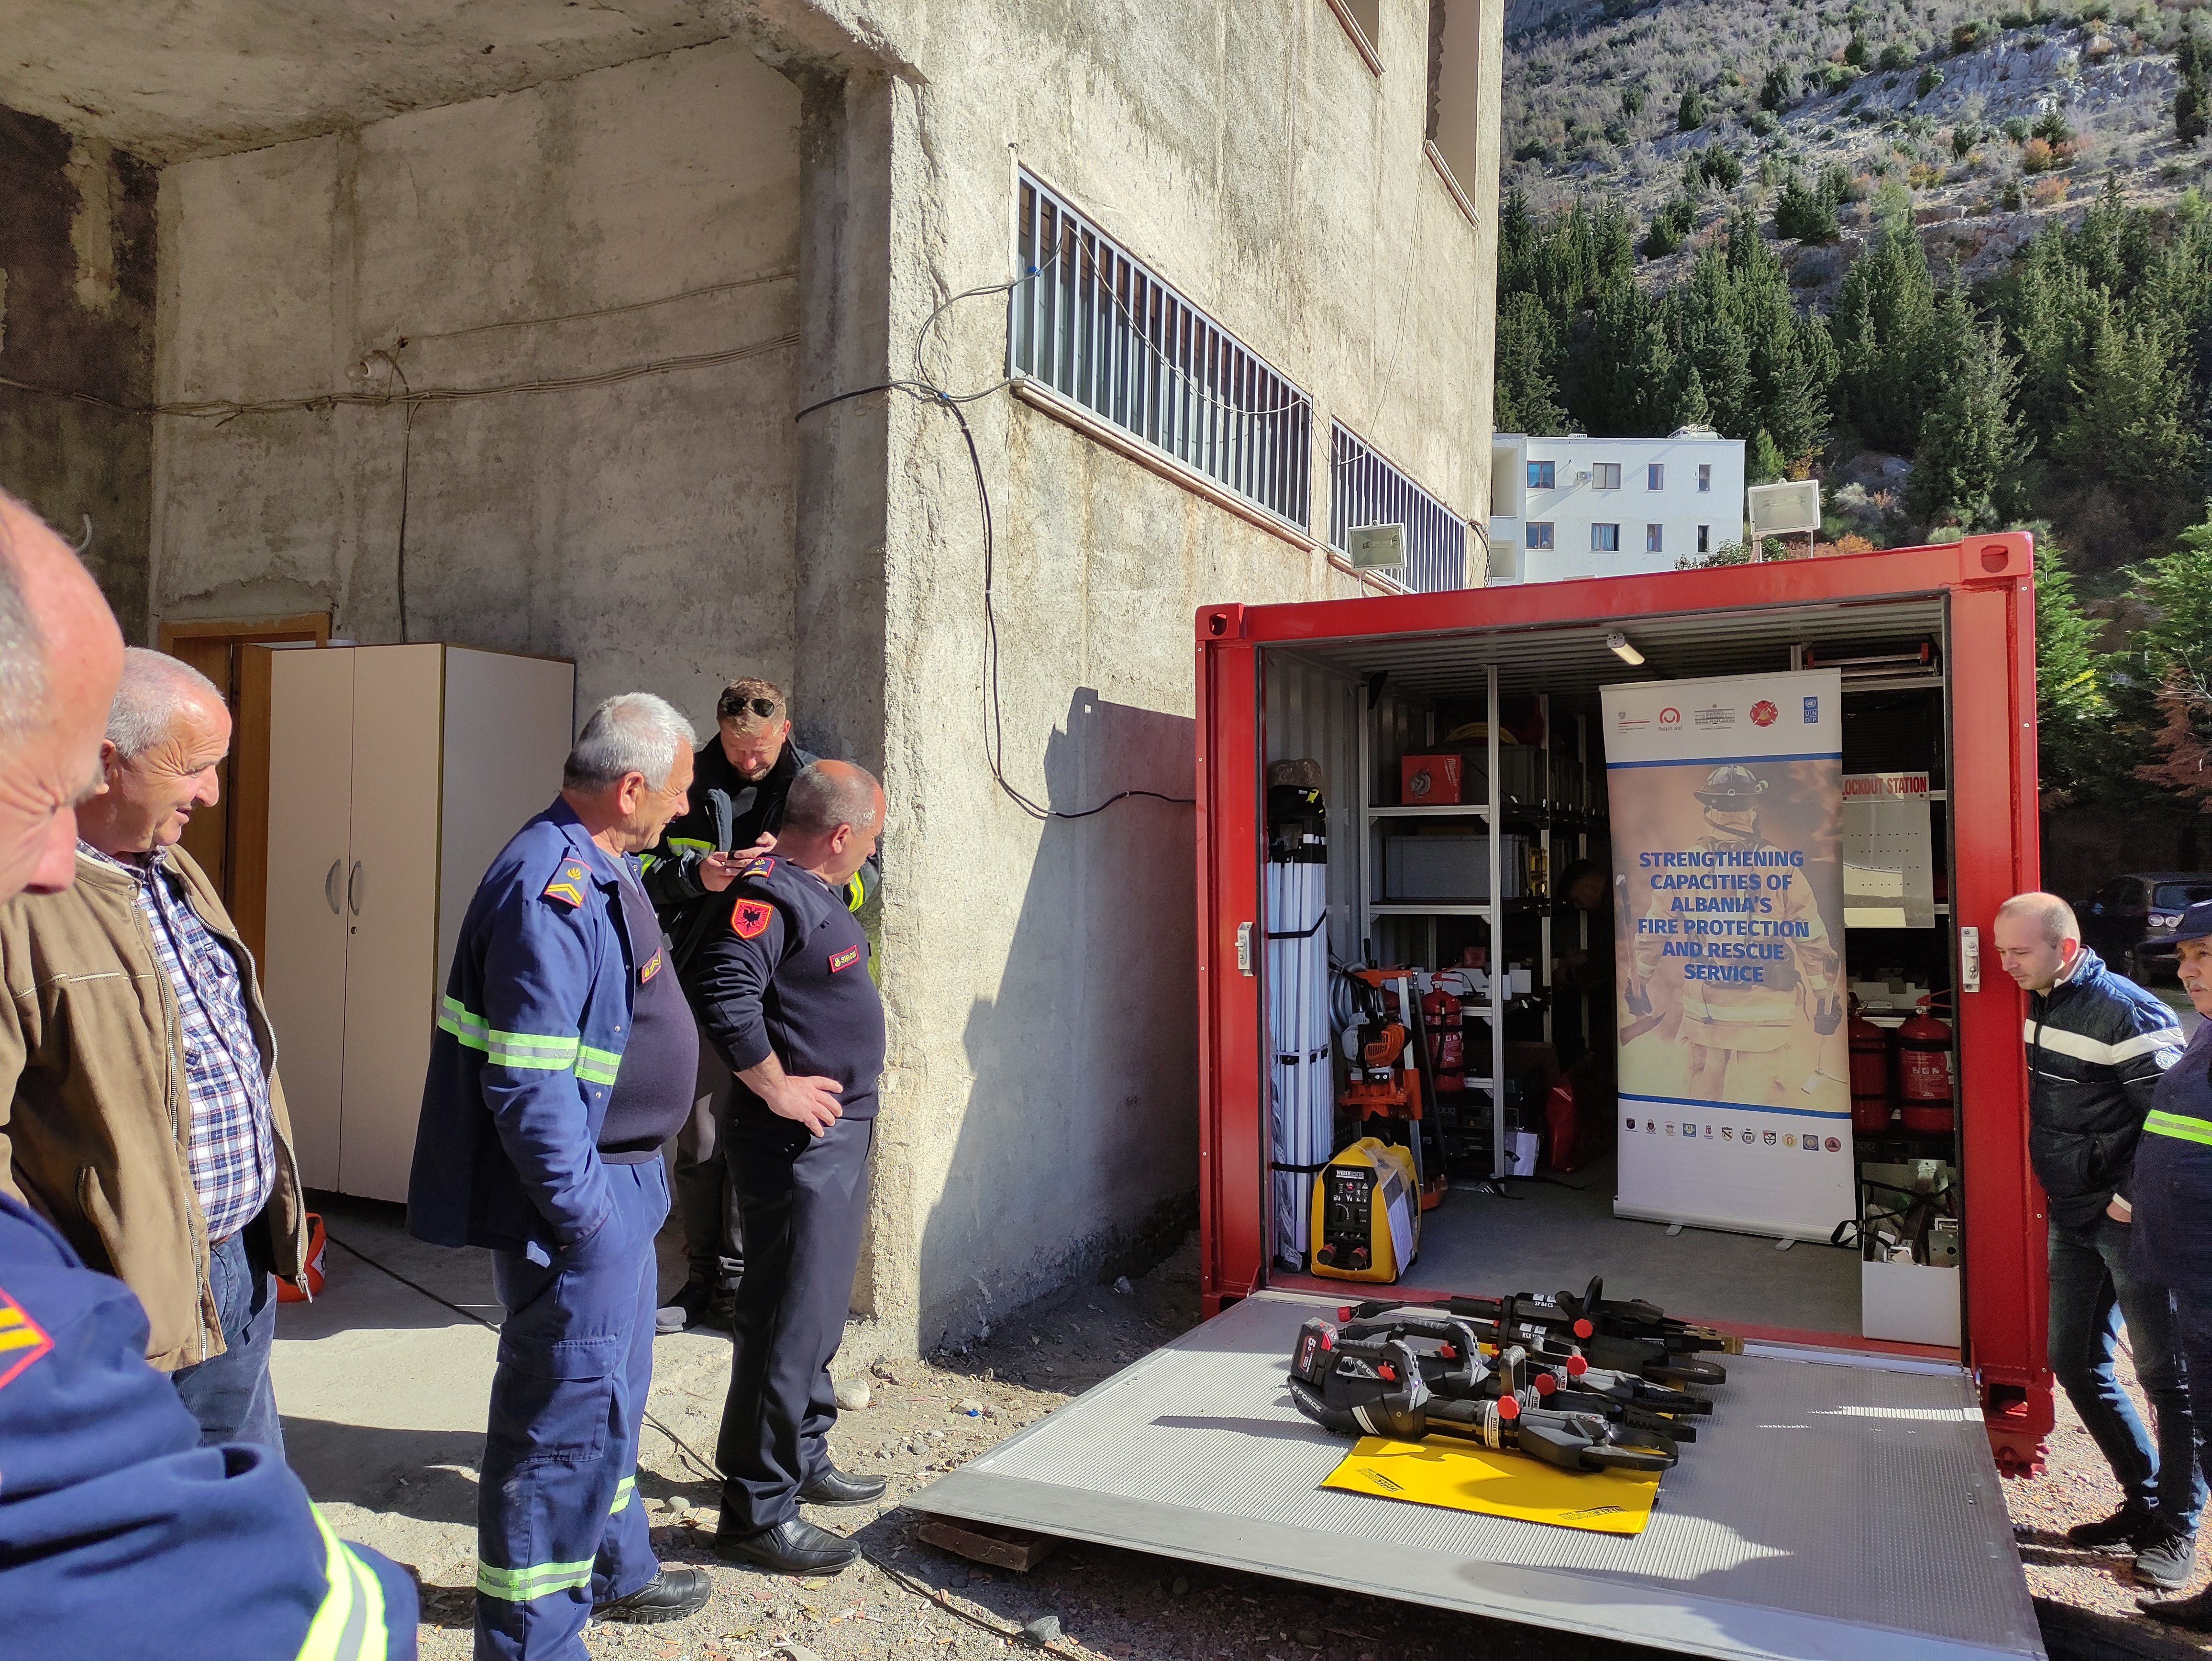 The handover of the USAR containers represents a significant achievement for the Albanian Fire and Rescue Service, and the impact of this project will be felt for many years to come.